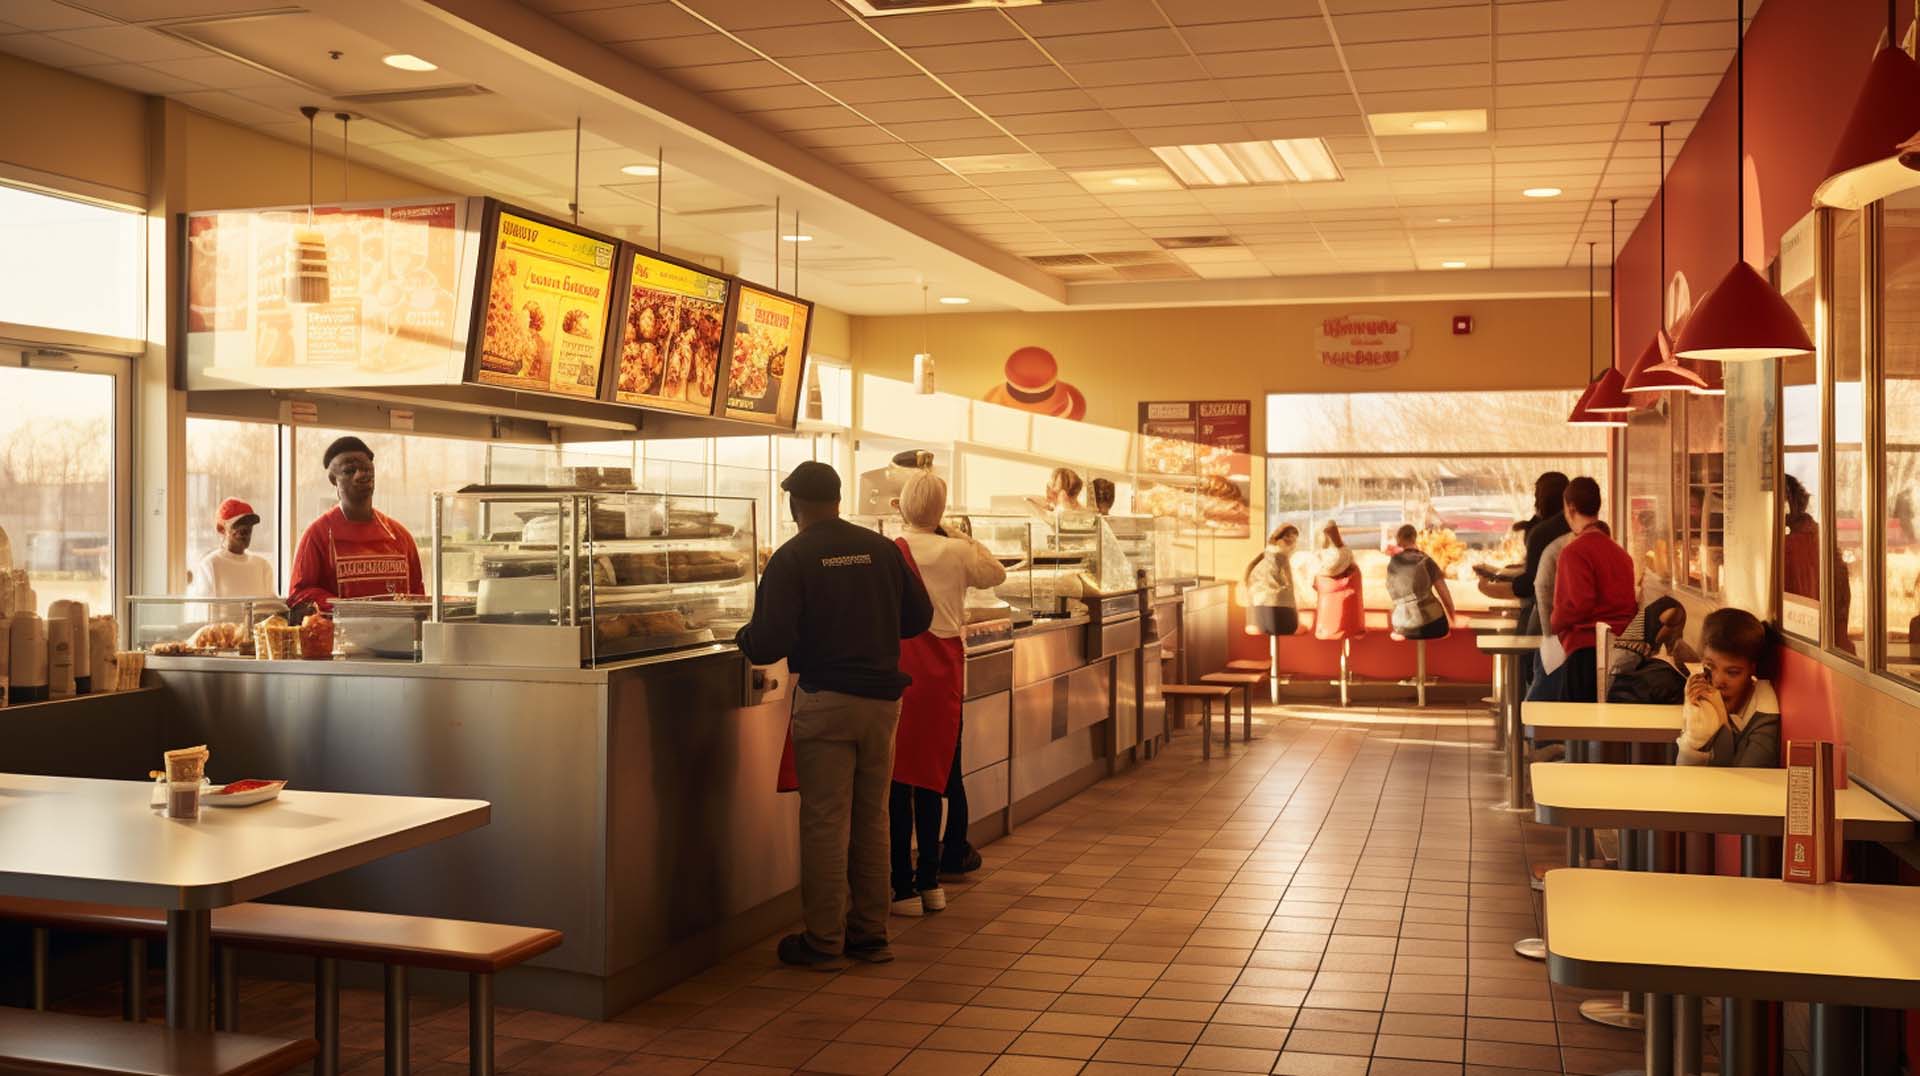 Shreveport has a wide variety of delicious fast food options to choose from.